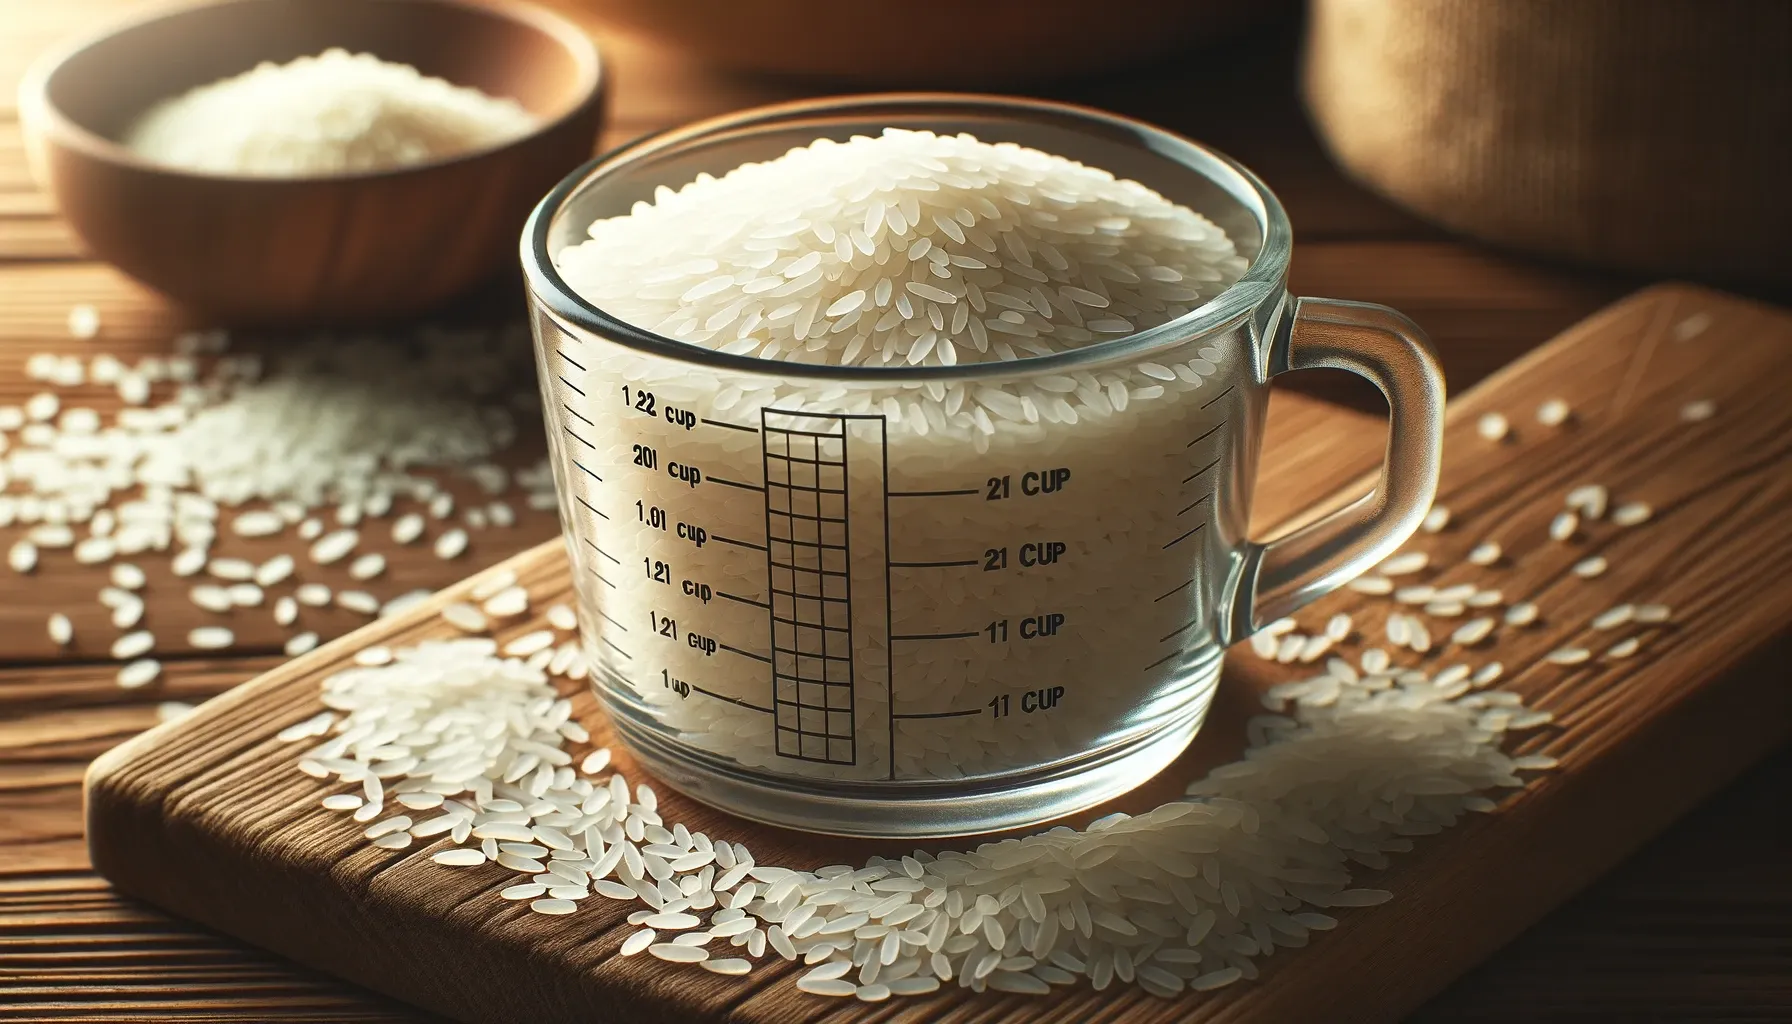 Measring How many Grains of Rice are in a Cup